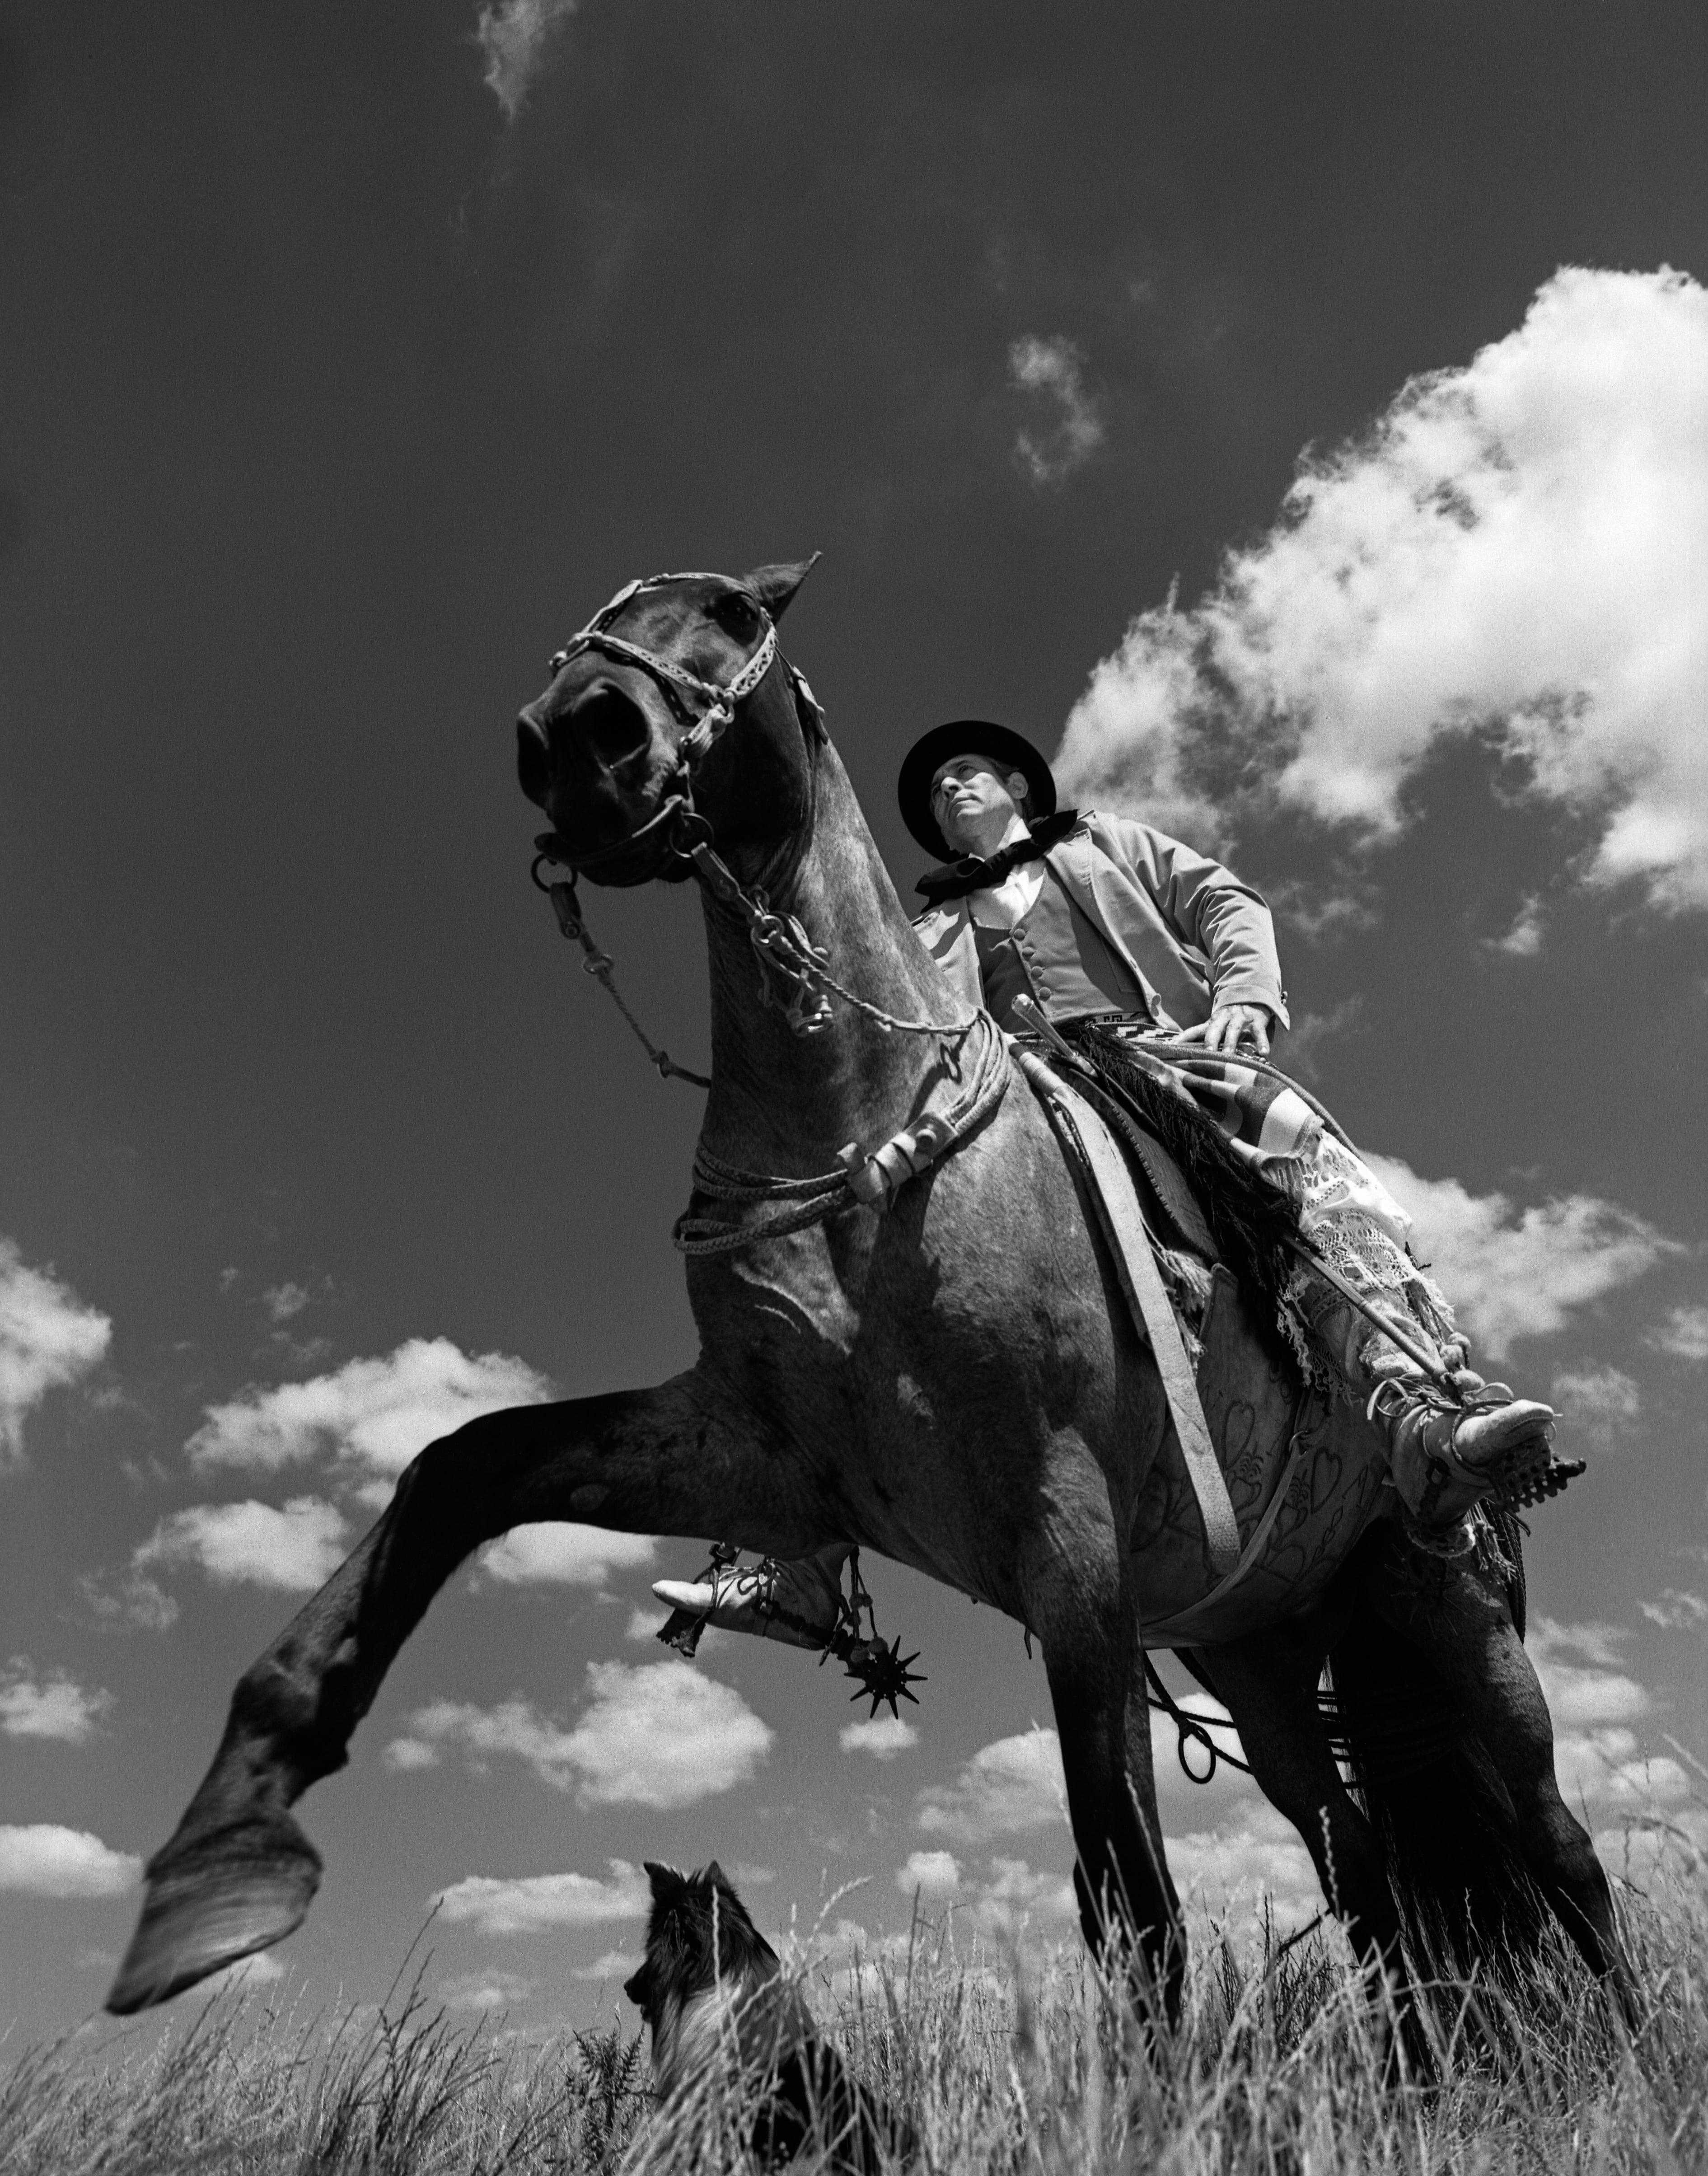 Aldo Sessa Black and White Photograph - Gaucho's Monument (Province of Buenos Aires Argentina)